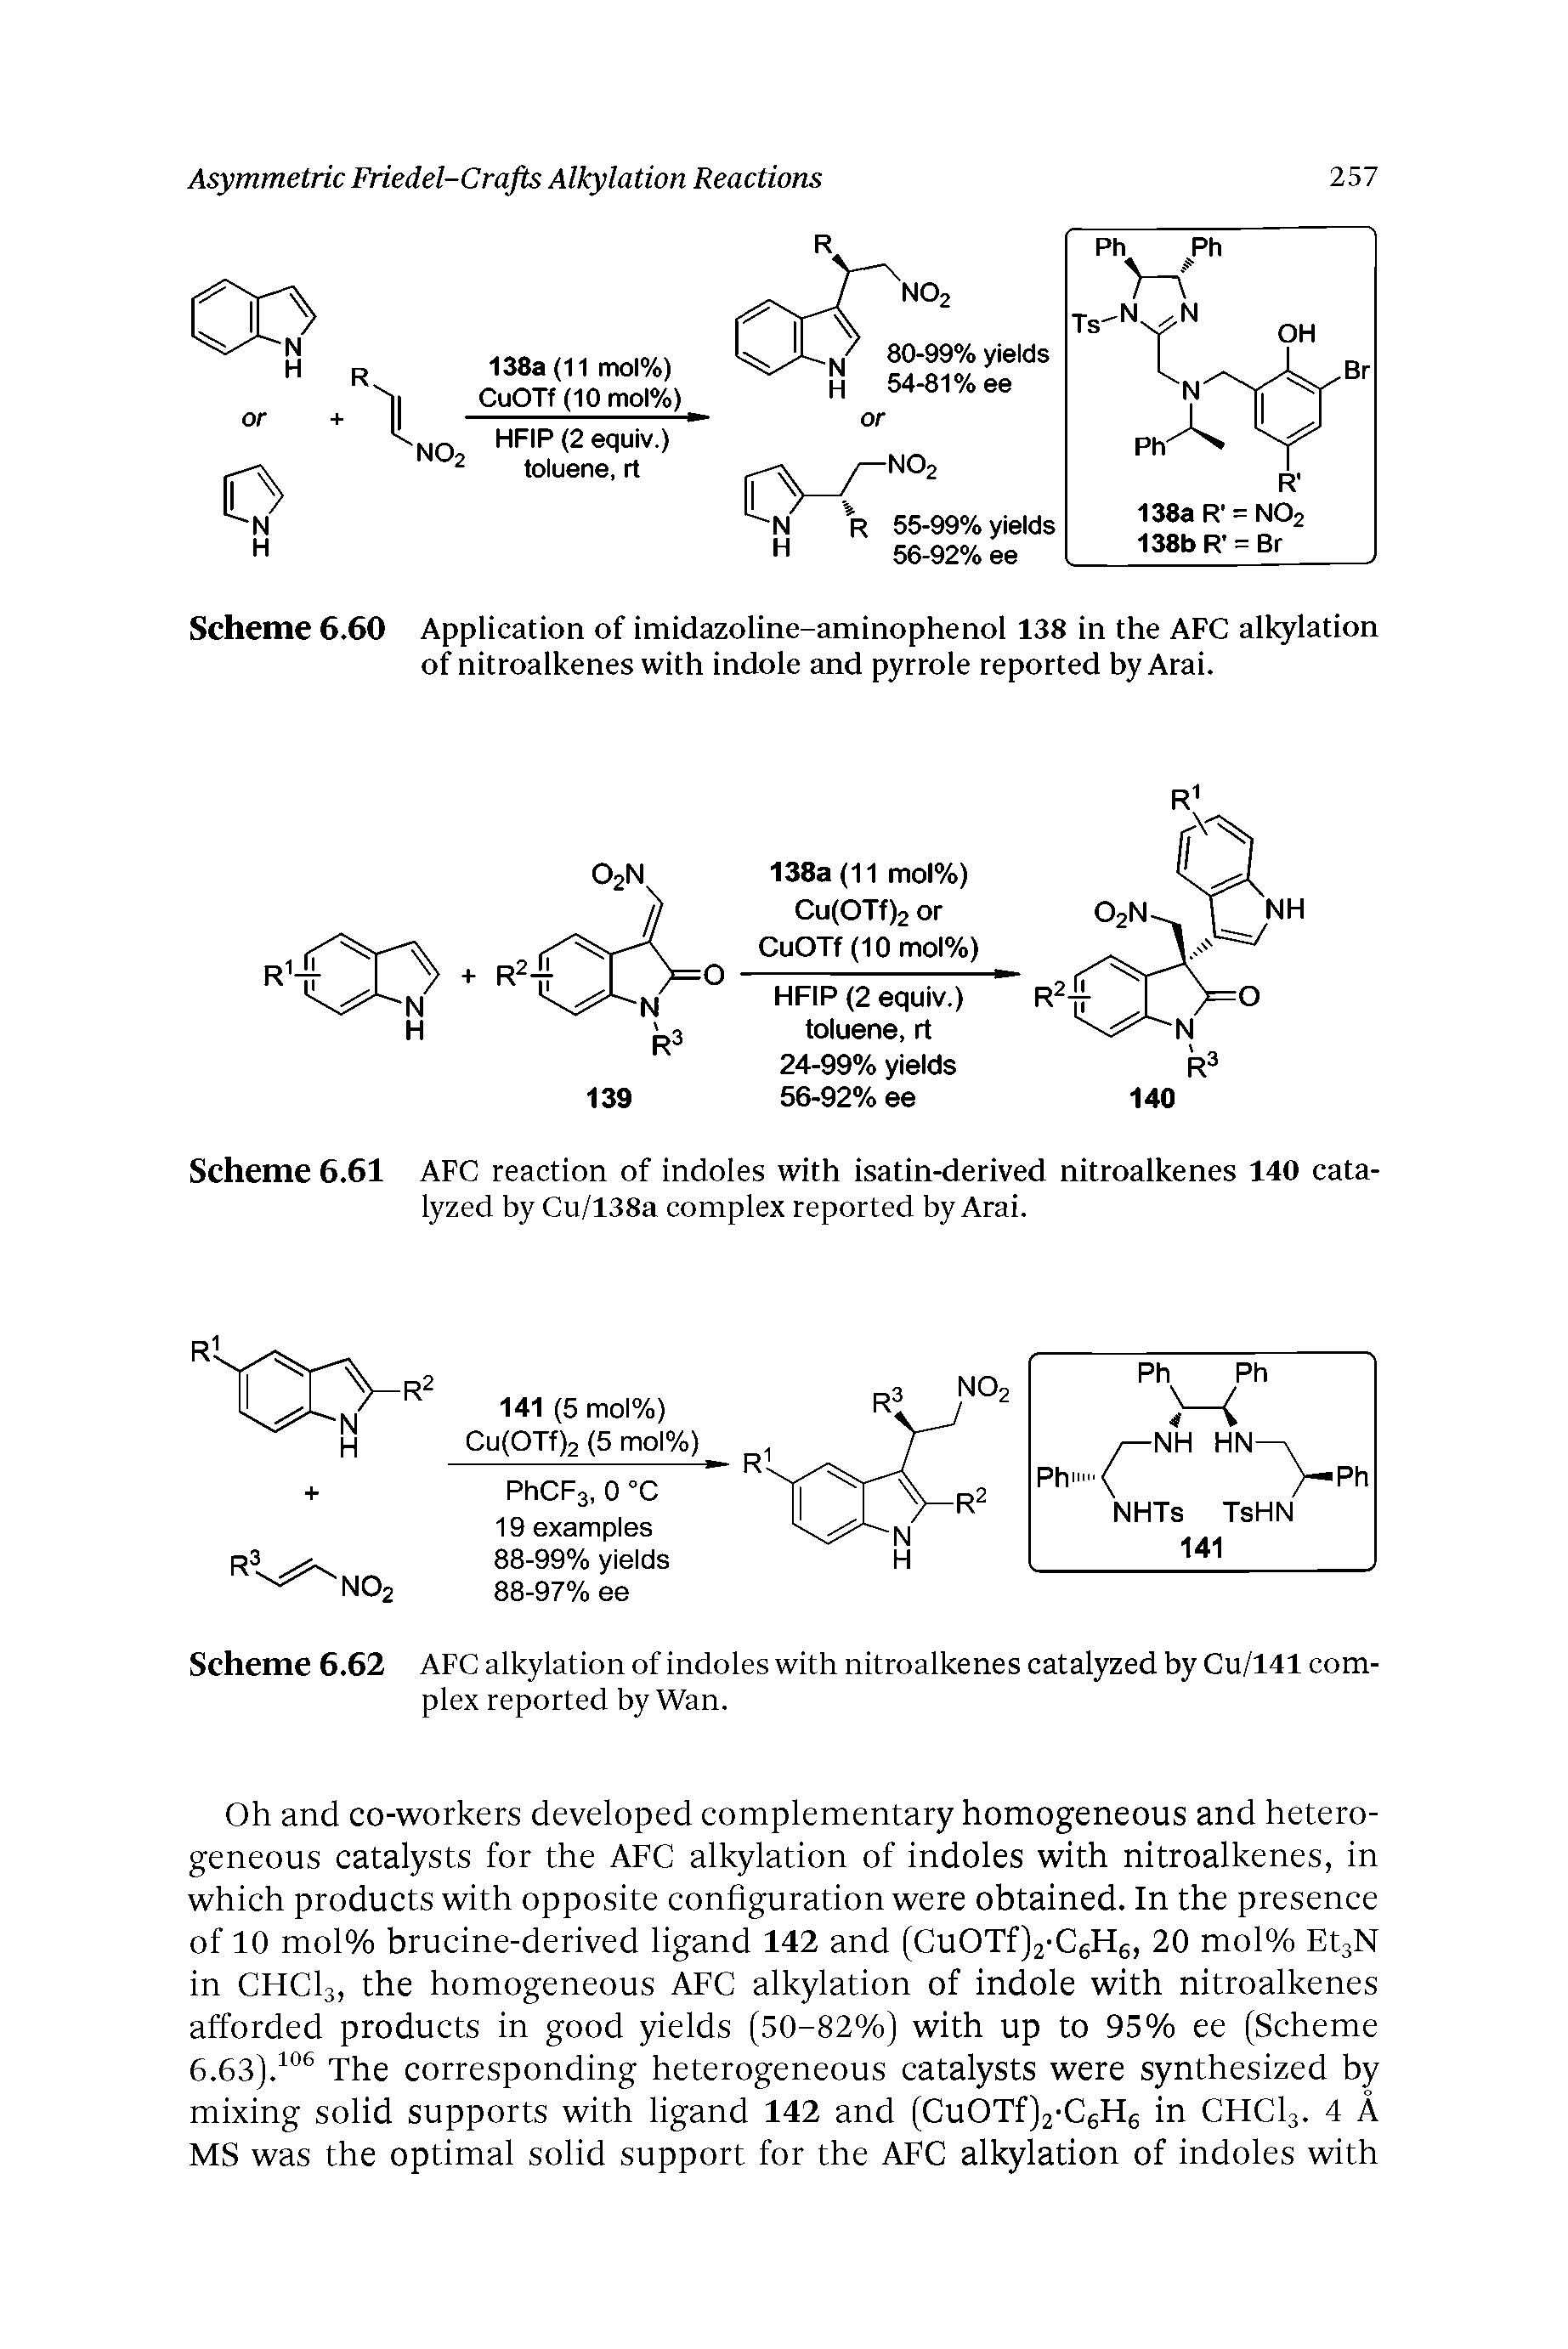 Scheme 6.61 AFC reaction of indoles with isatin-derived nitroalkenes 140 catalyzed by Cu/138a complex reported by Aral.